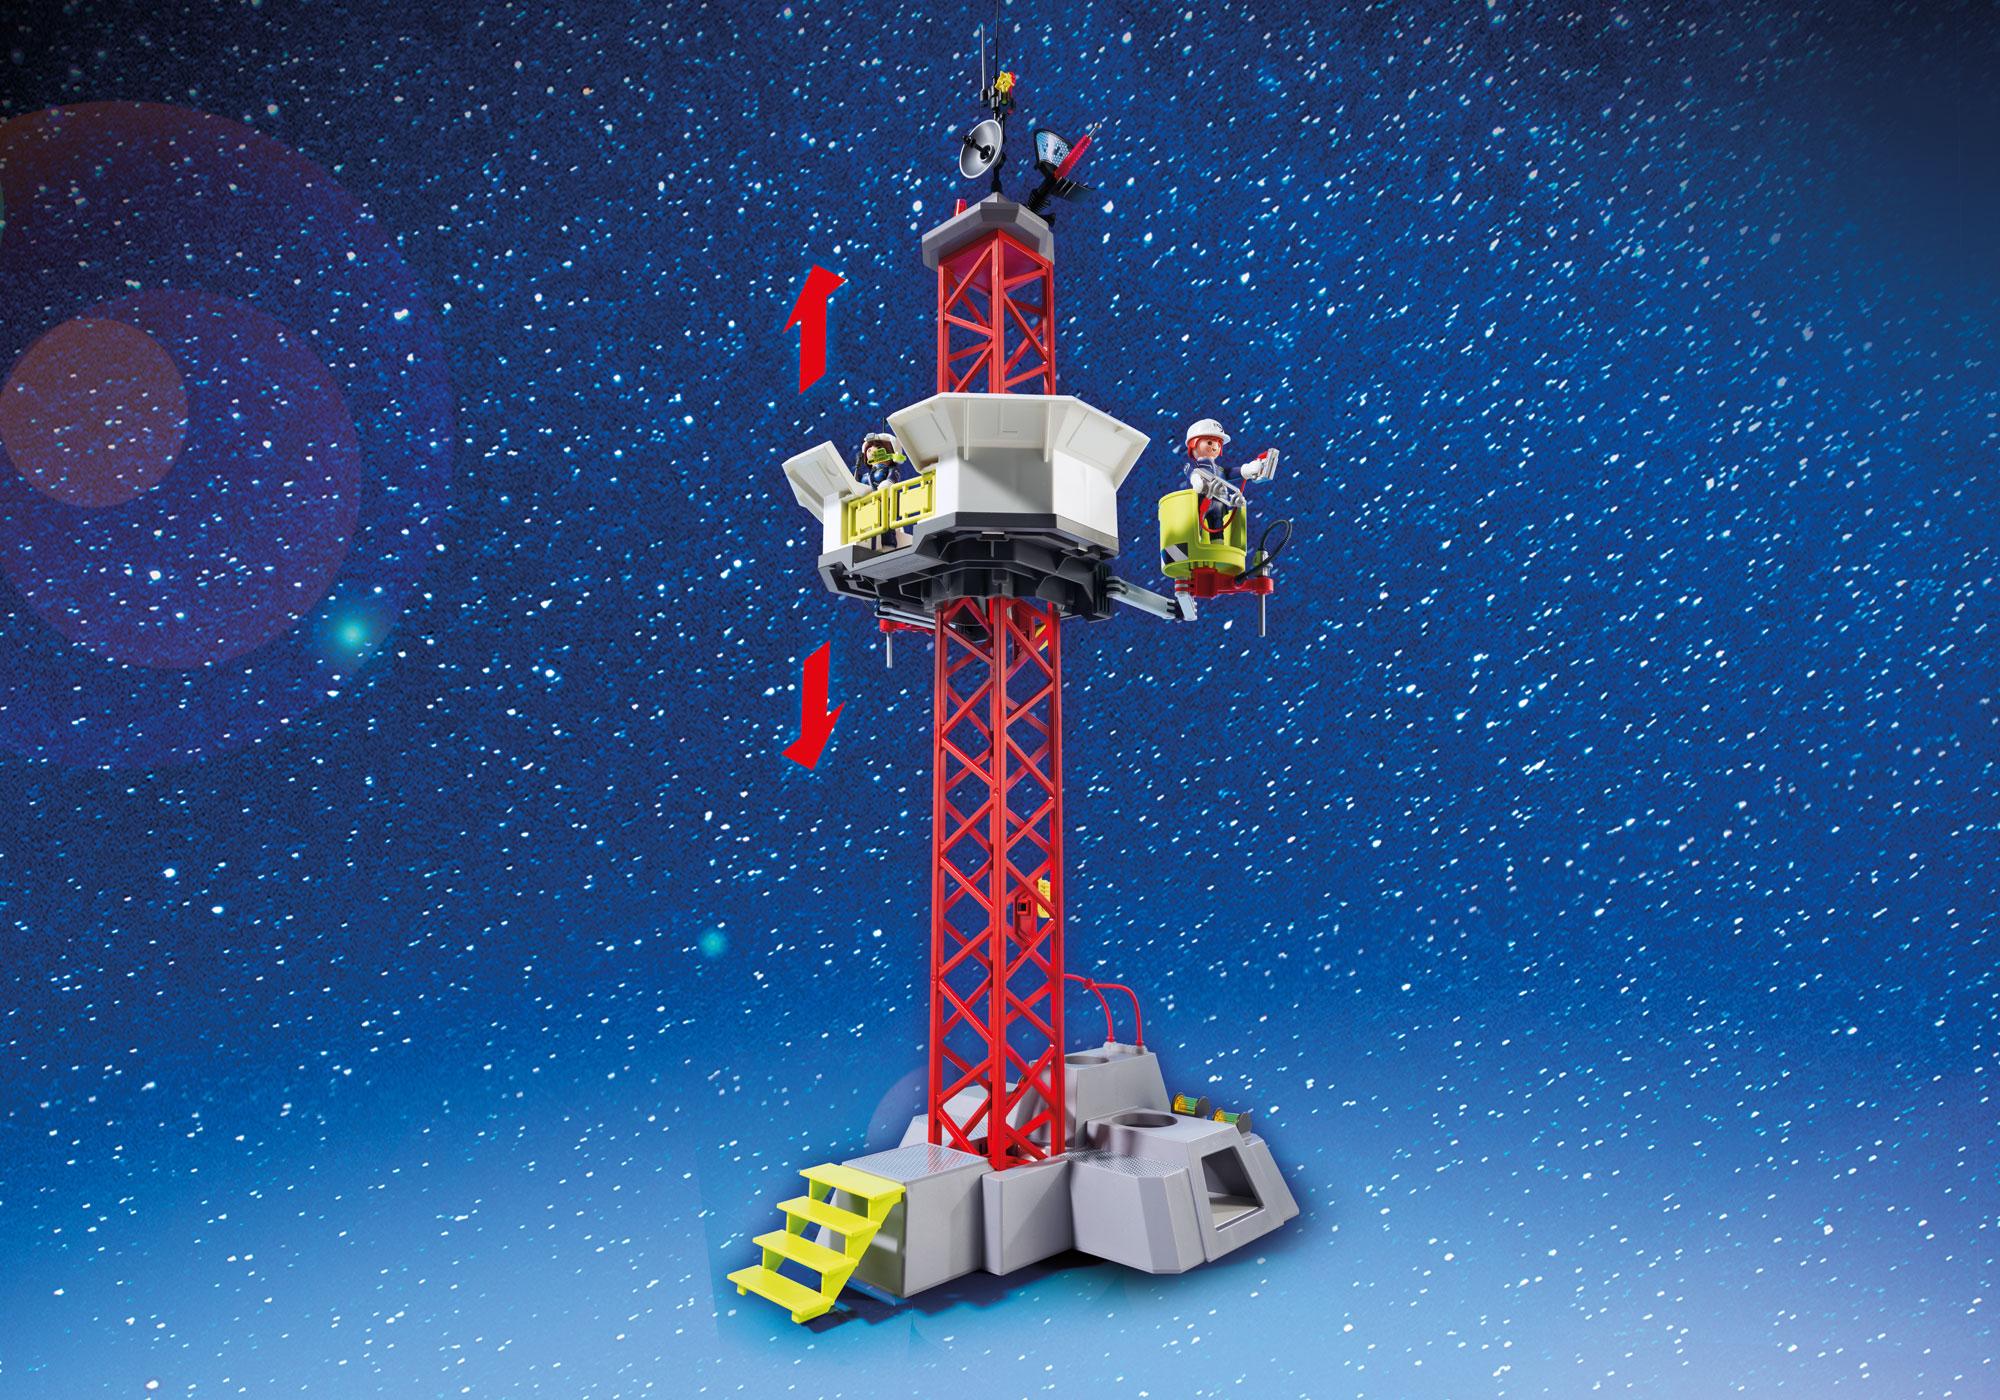 playmobil 9488 space mission rocket with launch site with lights and sound